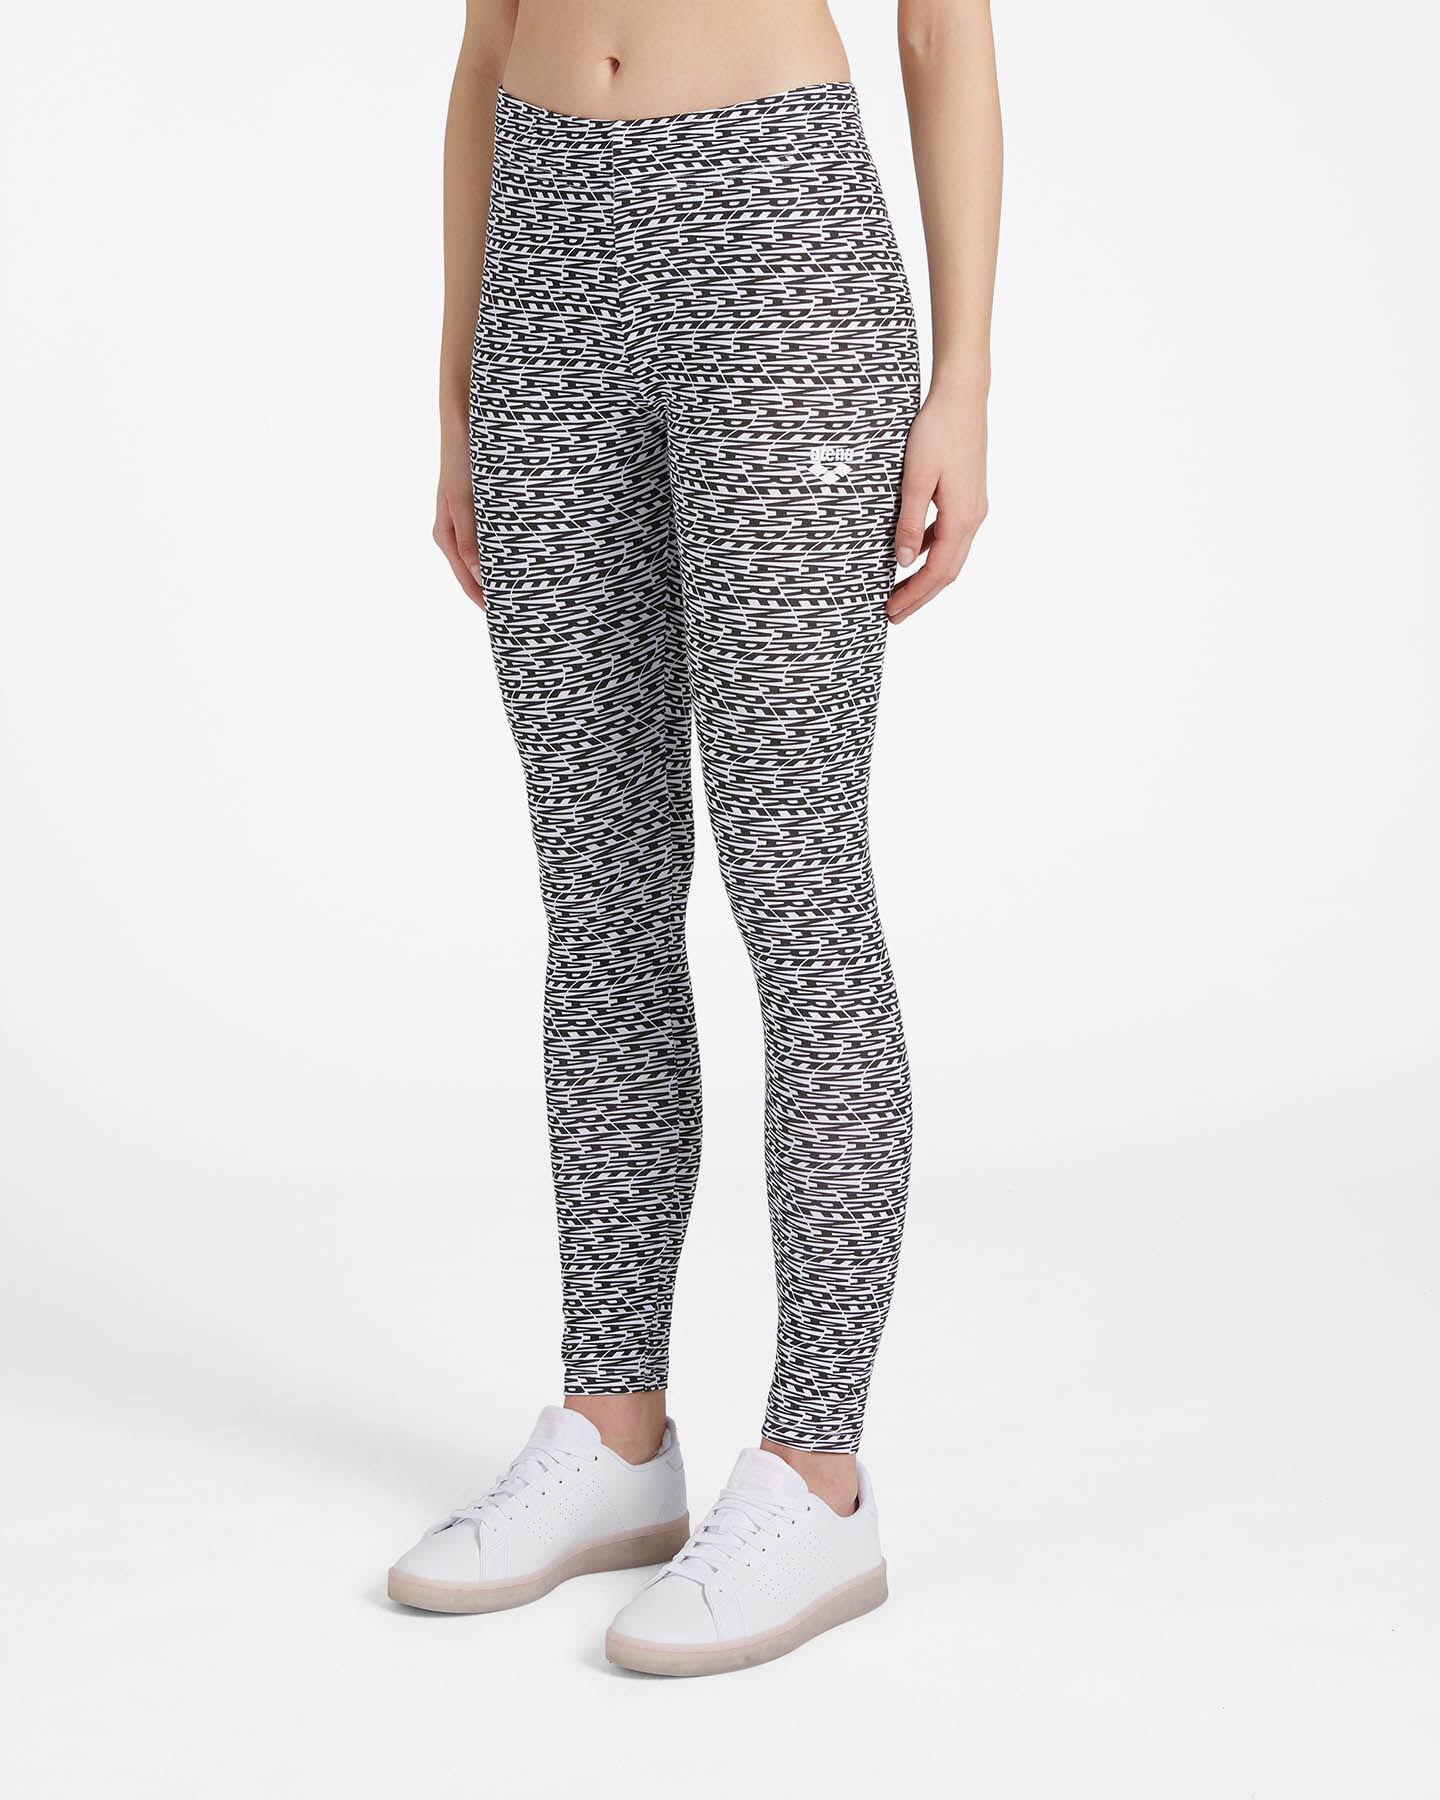  Leggings ARENA JSTRETCH AOP W S4087513|001/AOP|XS scatto 2